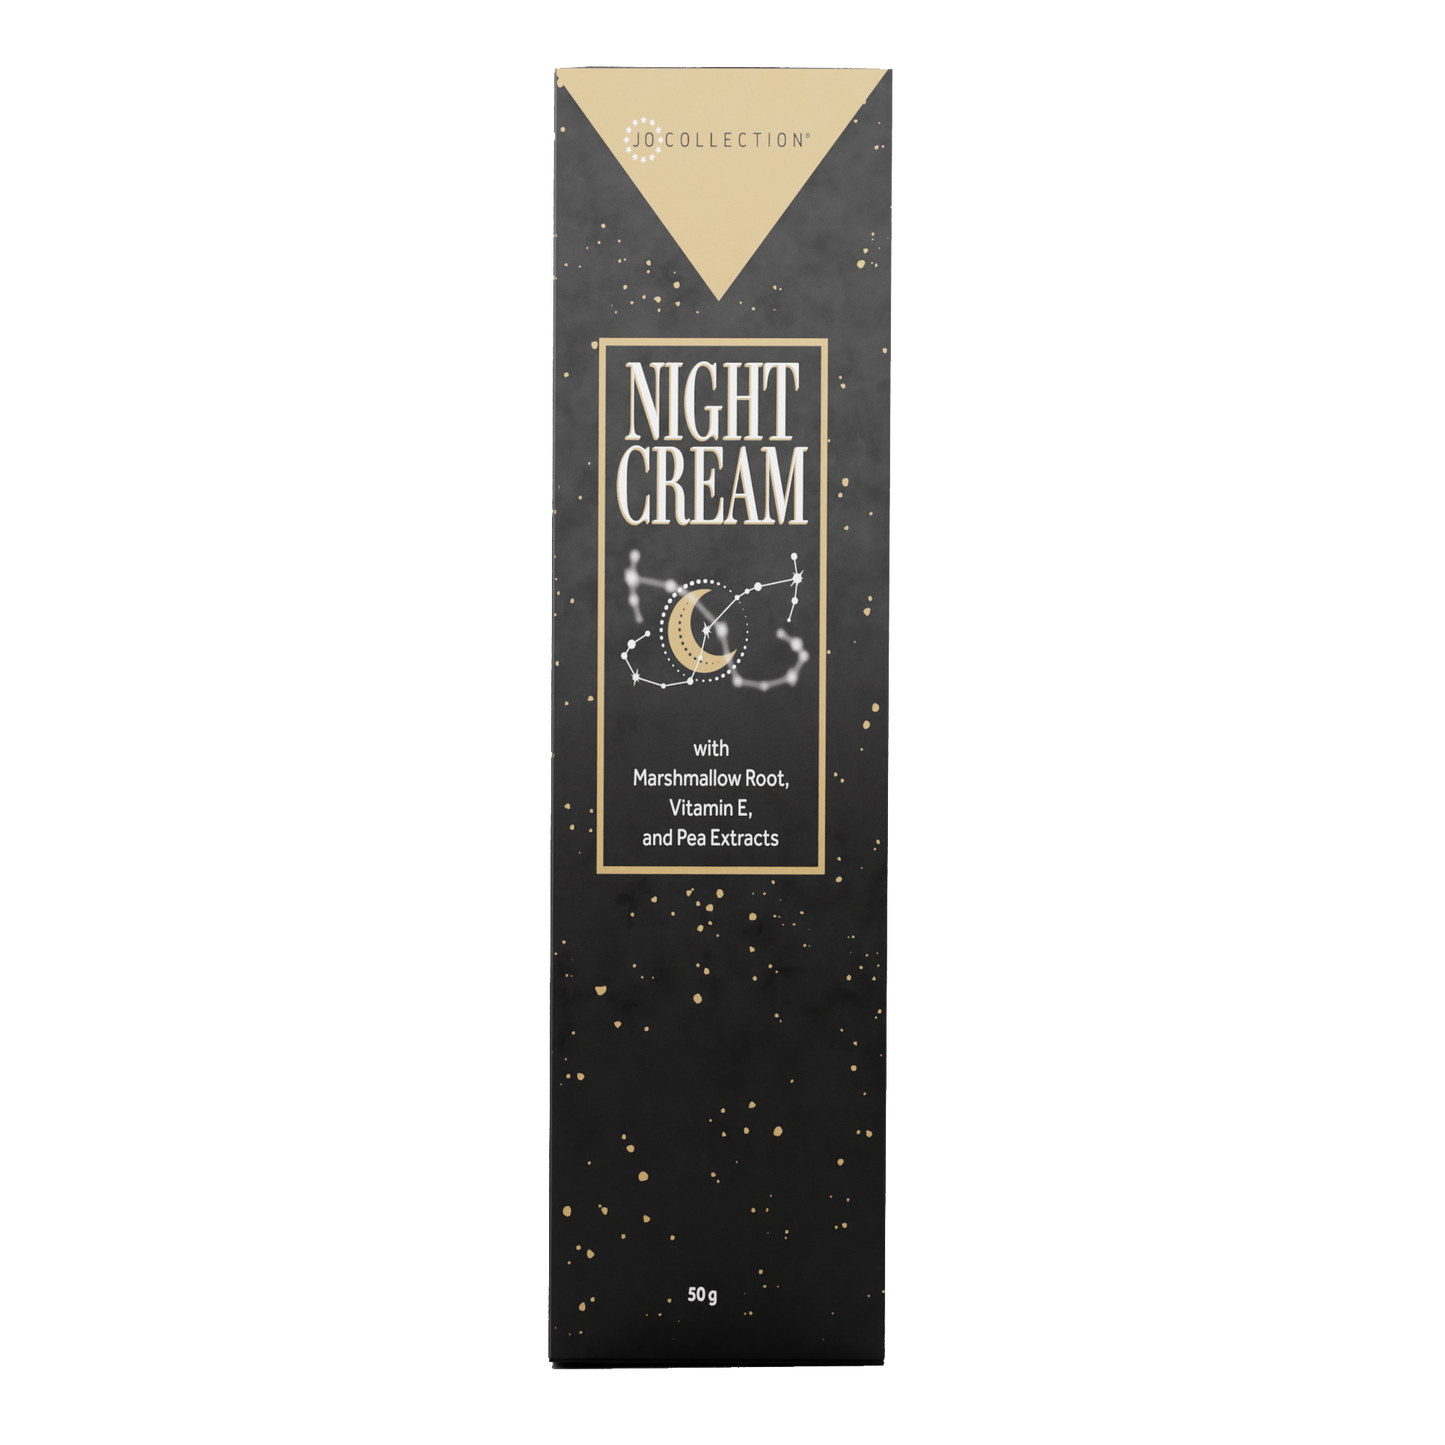 Night Cream with Marshmallow Root, Vitamin E, and Pea Extracts